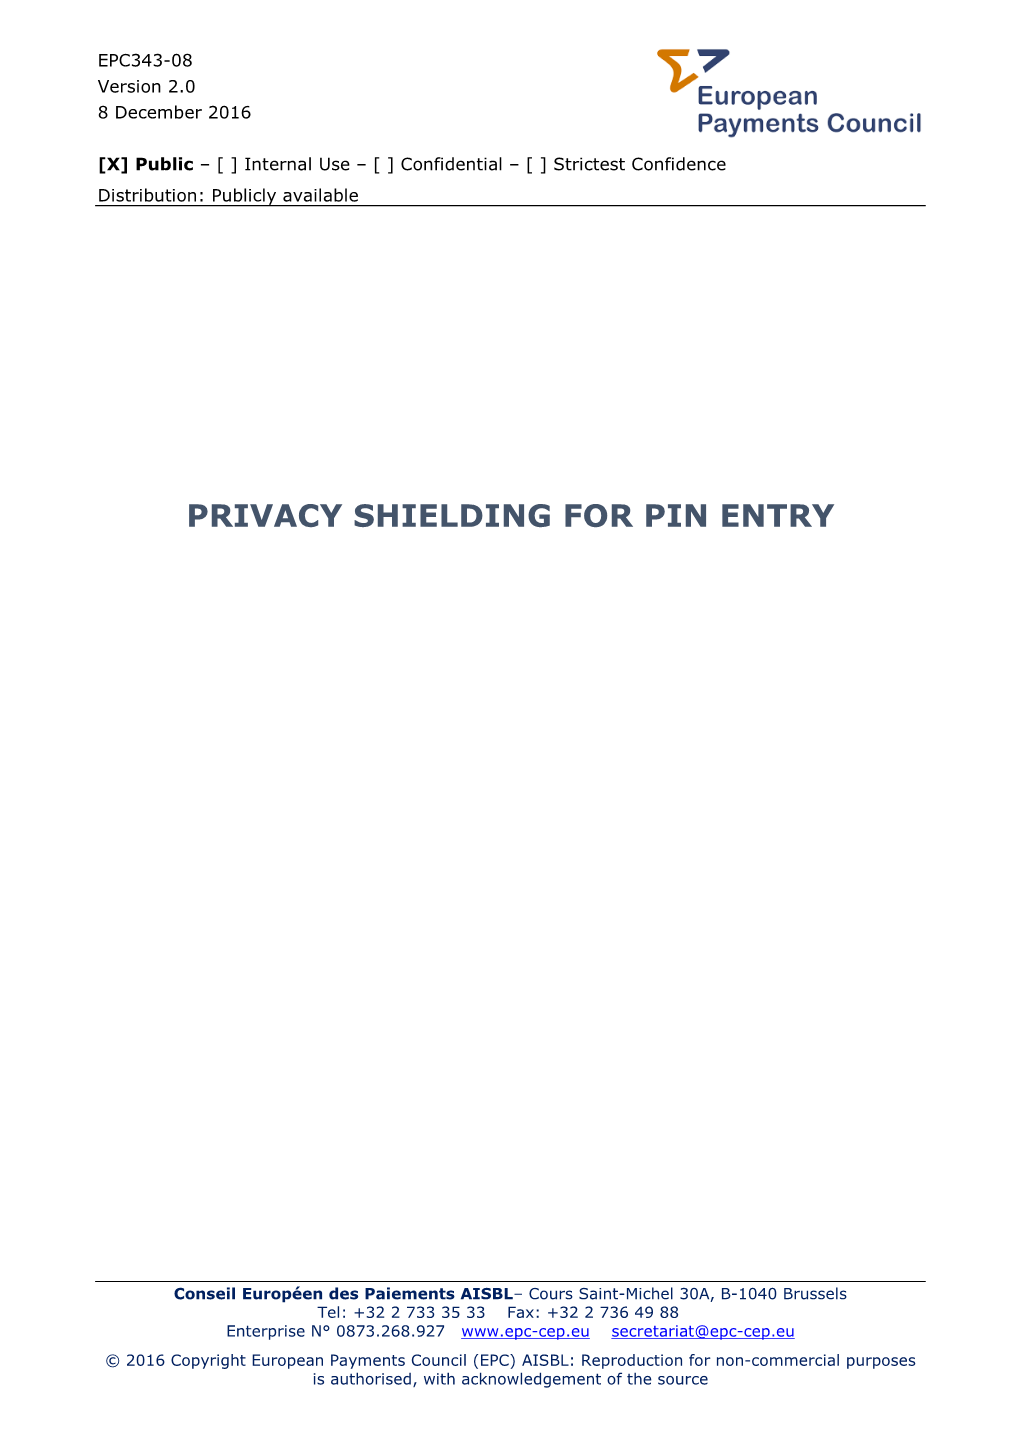 EPC343-08 V2.0 Privacy Shielding for PIN Entry 2